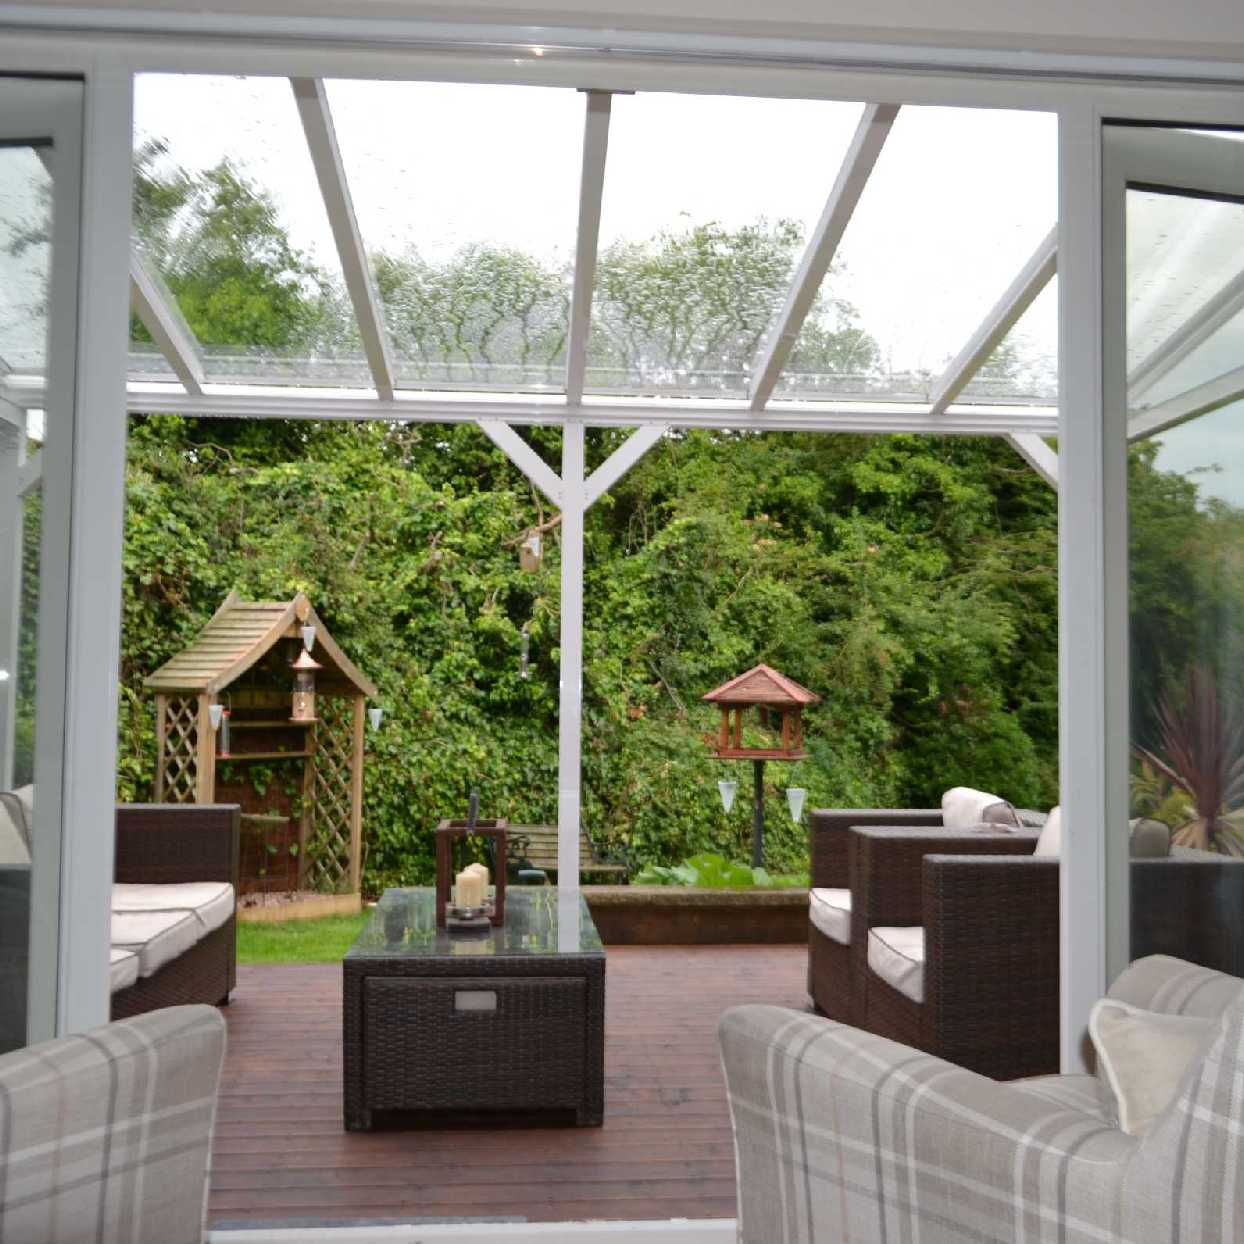 Buy Omega Smart Free-Standing, White MonoPitch Roof Canopy with 6mm Glass Clear Plate Polycarbonate Glazing - 2.8m (W) x 2.0m (P), (4) Supporting Posts online today